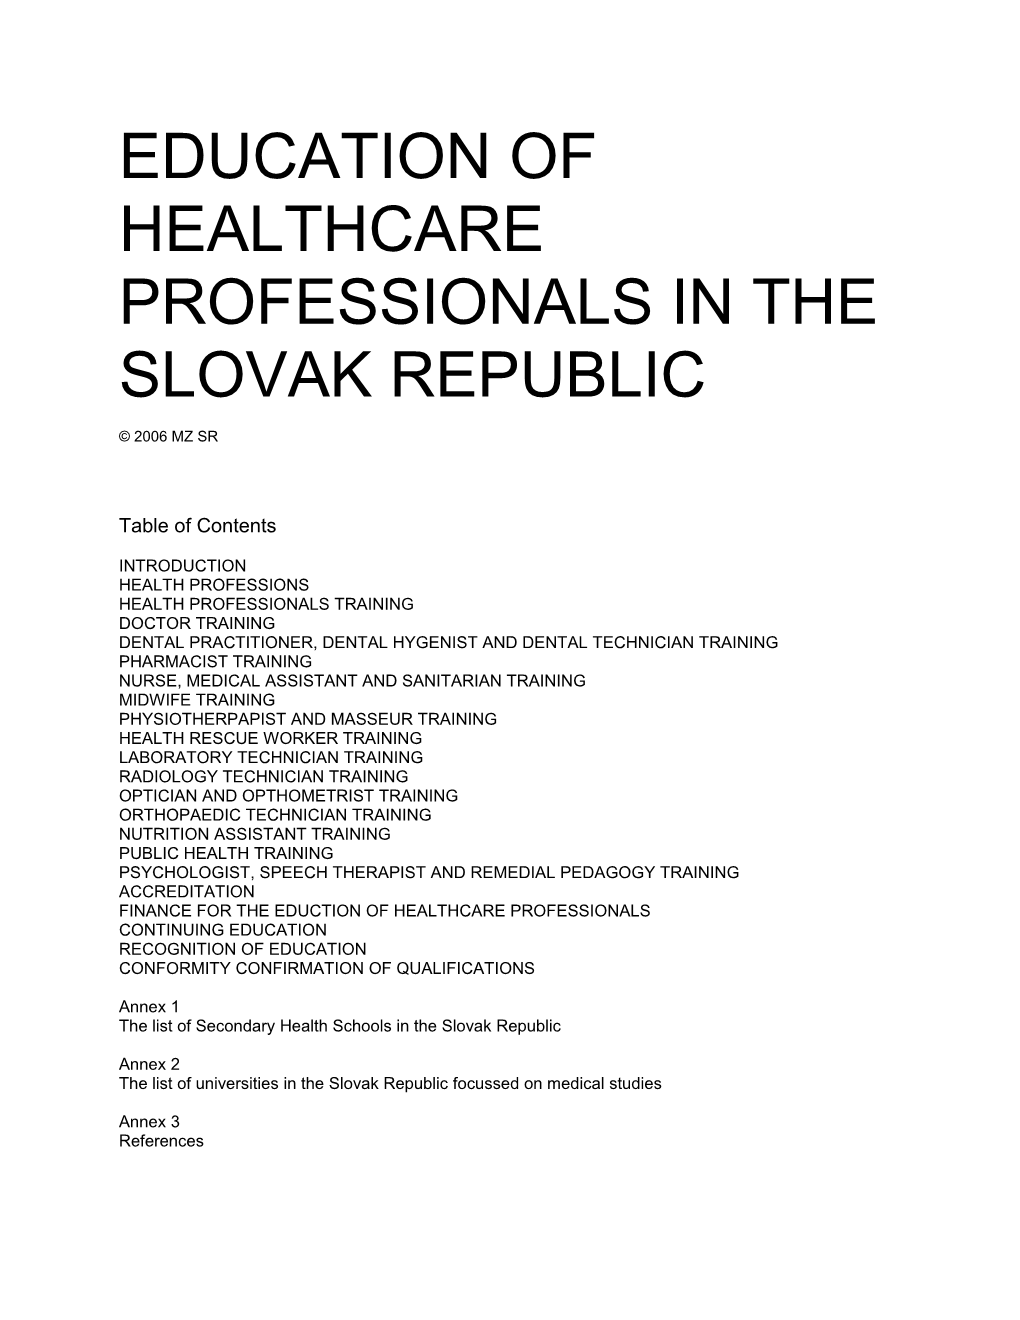 Education of Healthcare Professionals in the Slovak Republic